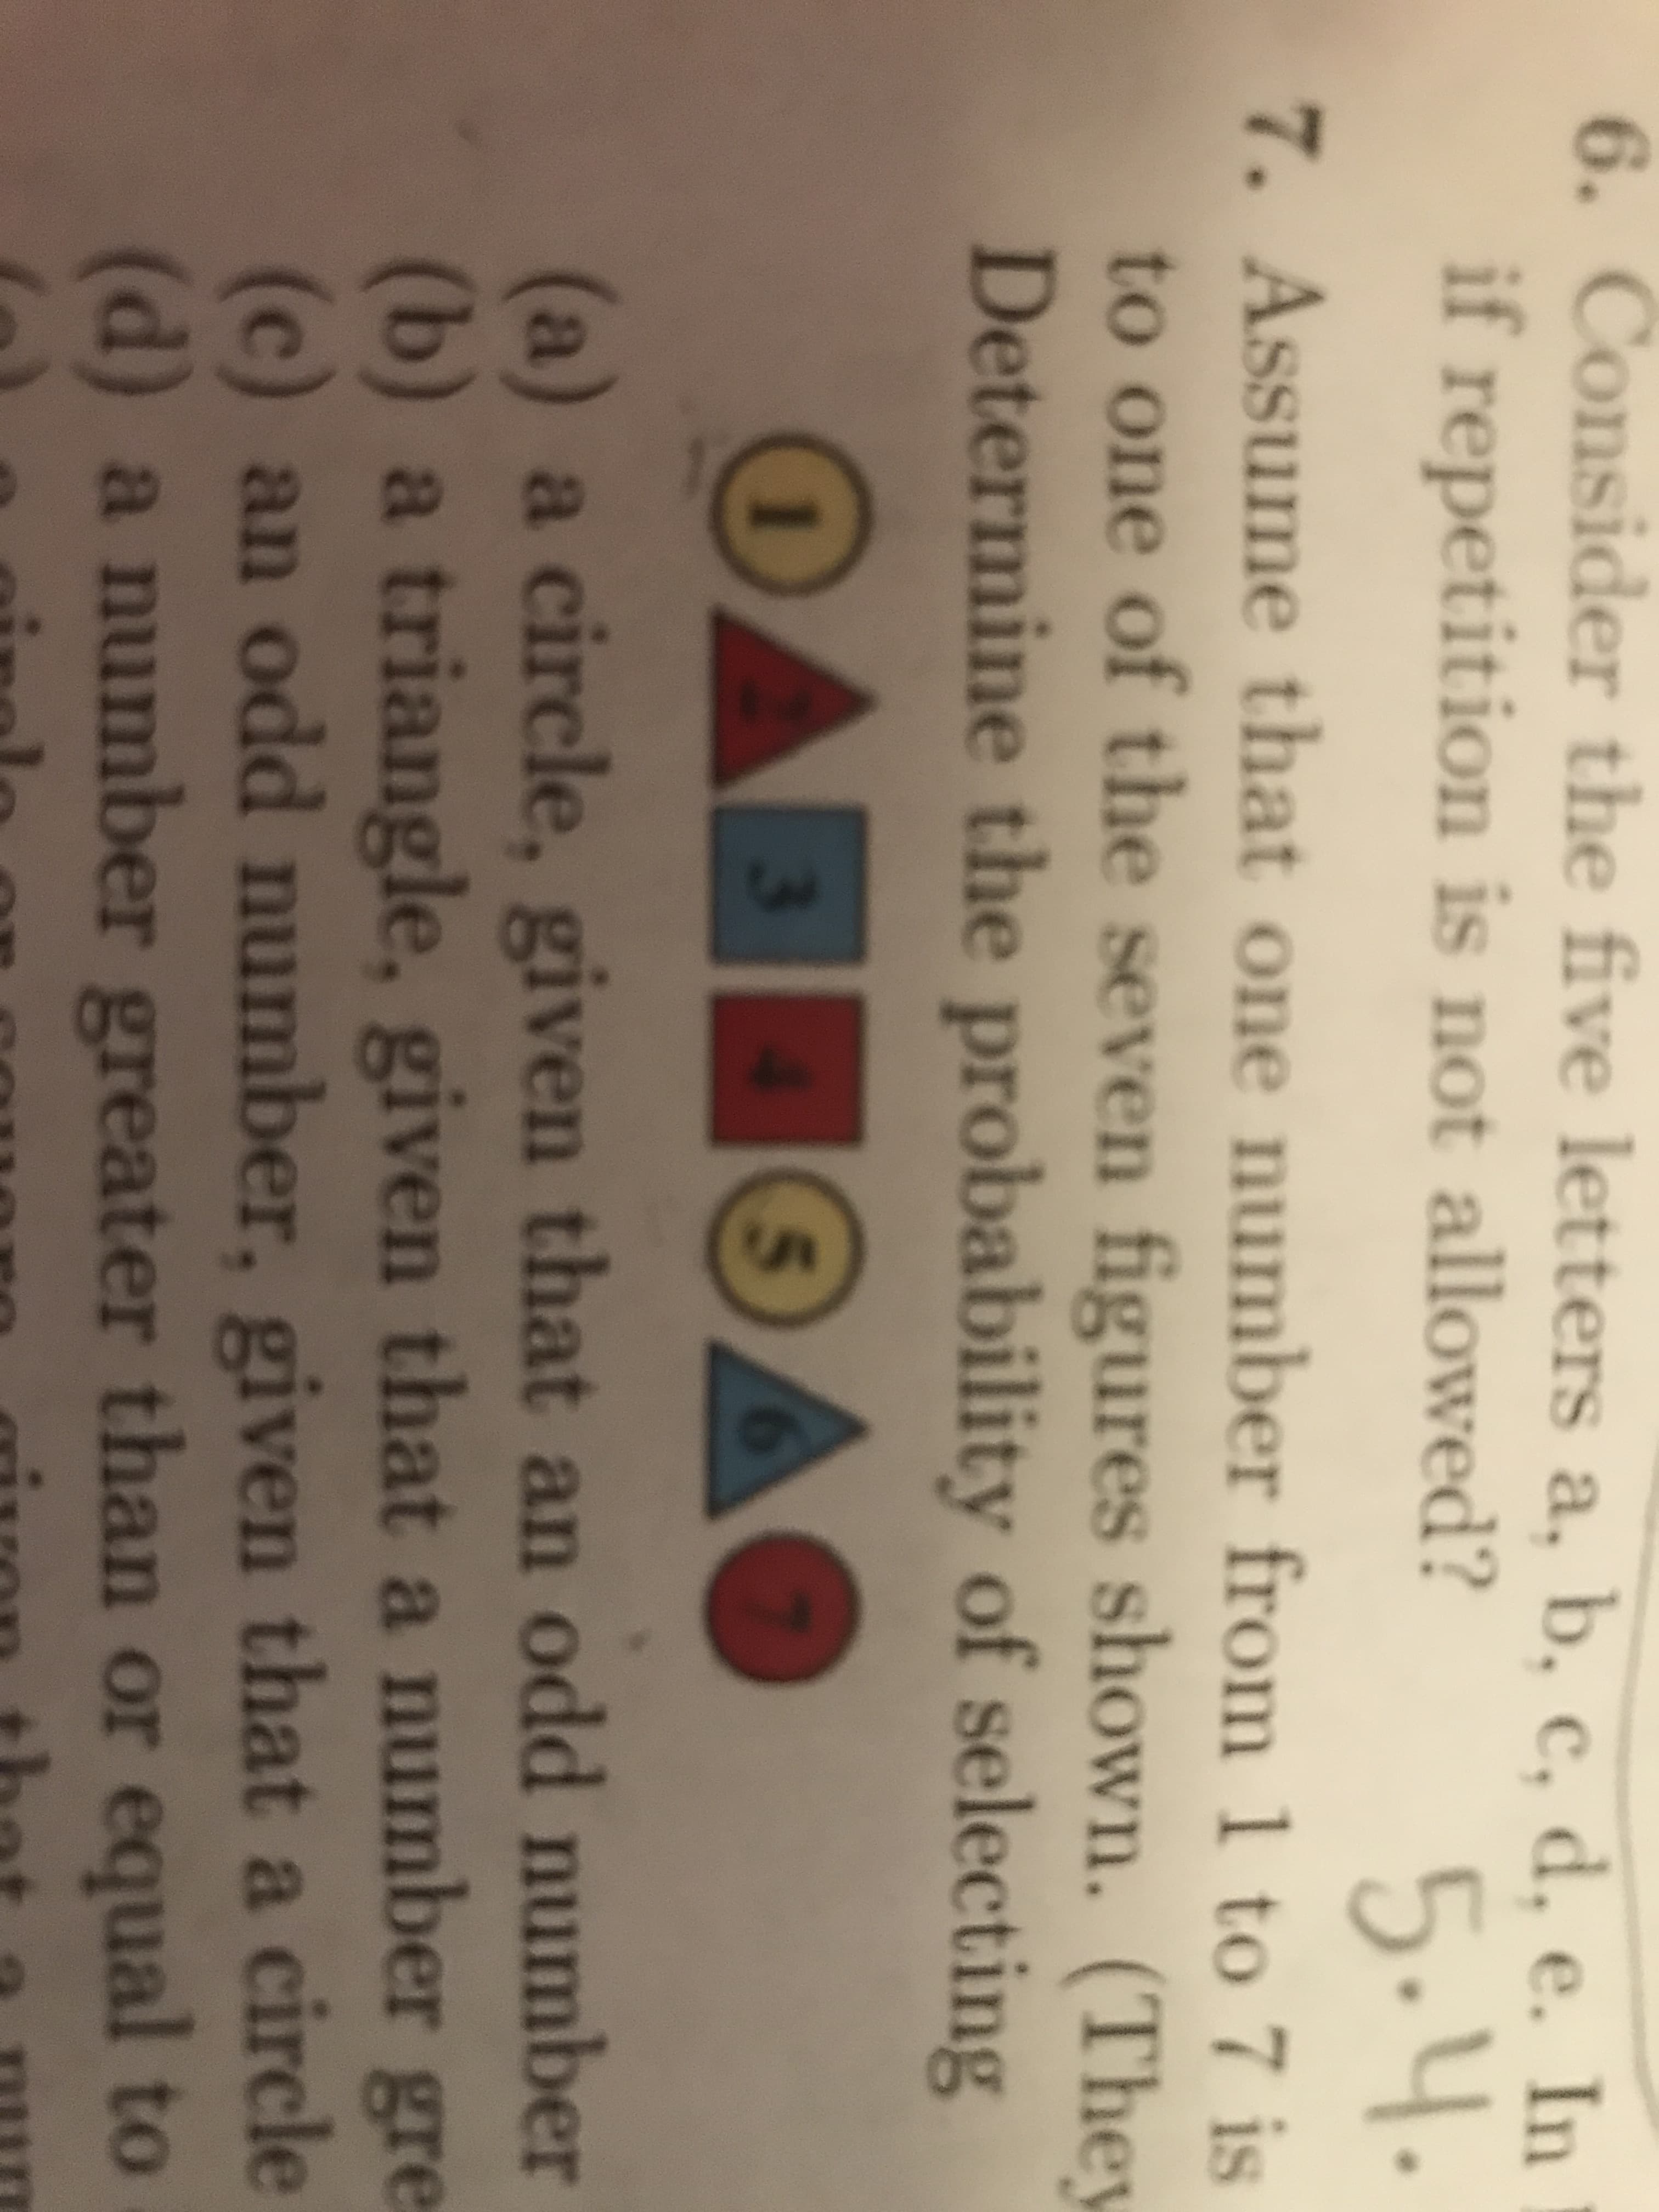 6. Consider the five letters a, b, e, d. e. In
е. In
if repetition is not allowed?
5.4
.
7. Assume that one number from 1 to 7 is
to one of the seven figures shown. (They
Determine the probability of selecting
OADS
Эде
(a) a circle, given that an odd number
b) a triangle, given that a number gre
(c) an odd number, given that a circle
(d) a number greater than or equal to
